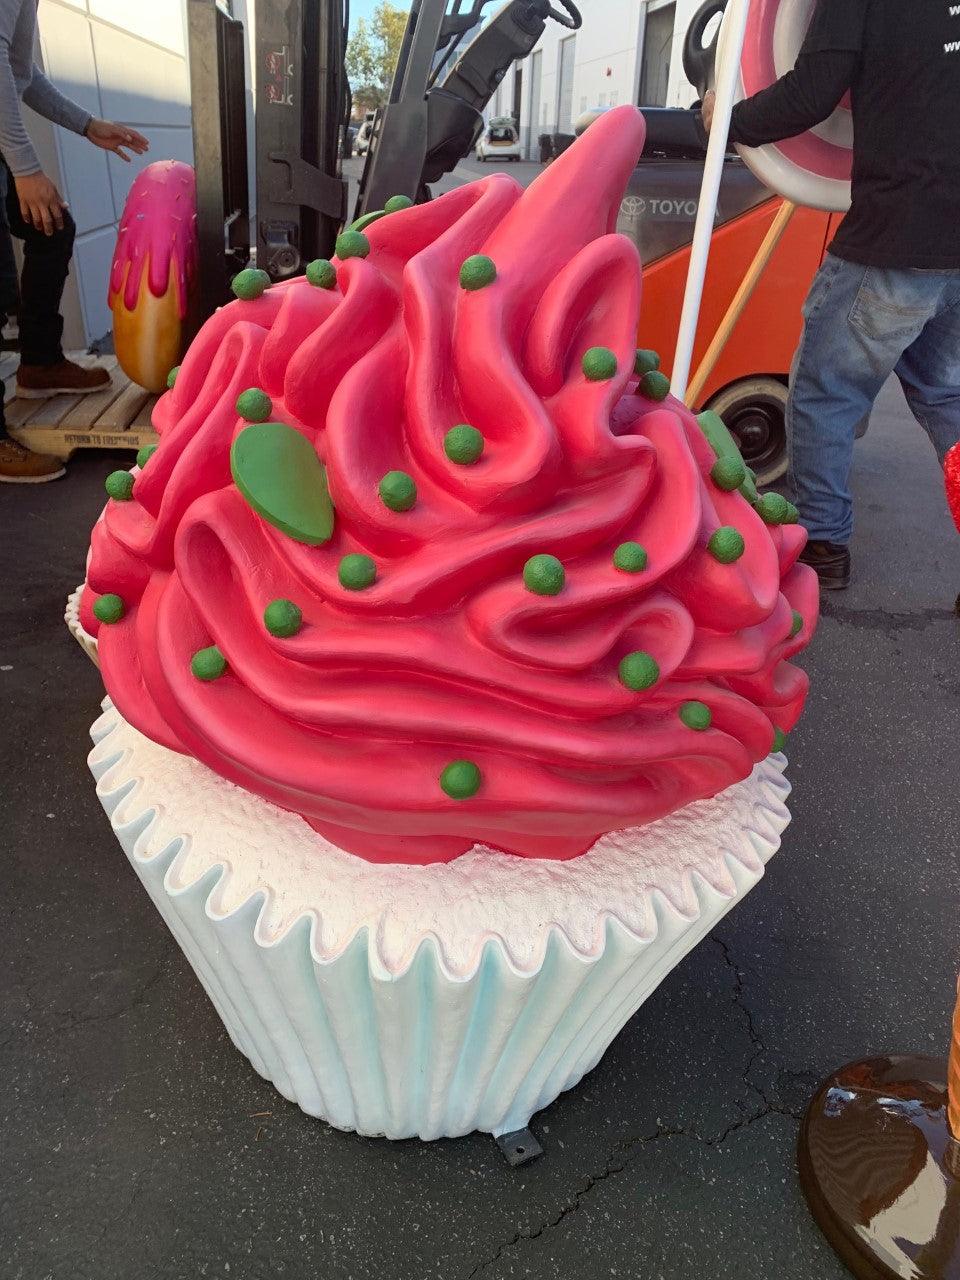 Giant Pink Cupcake Statue